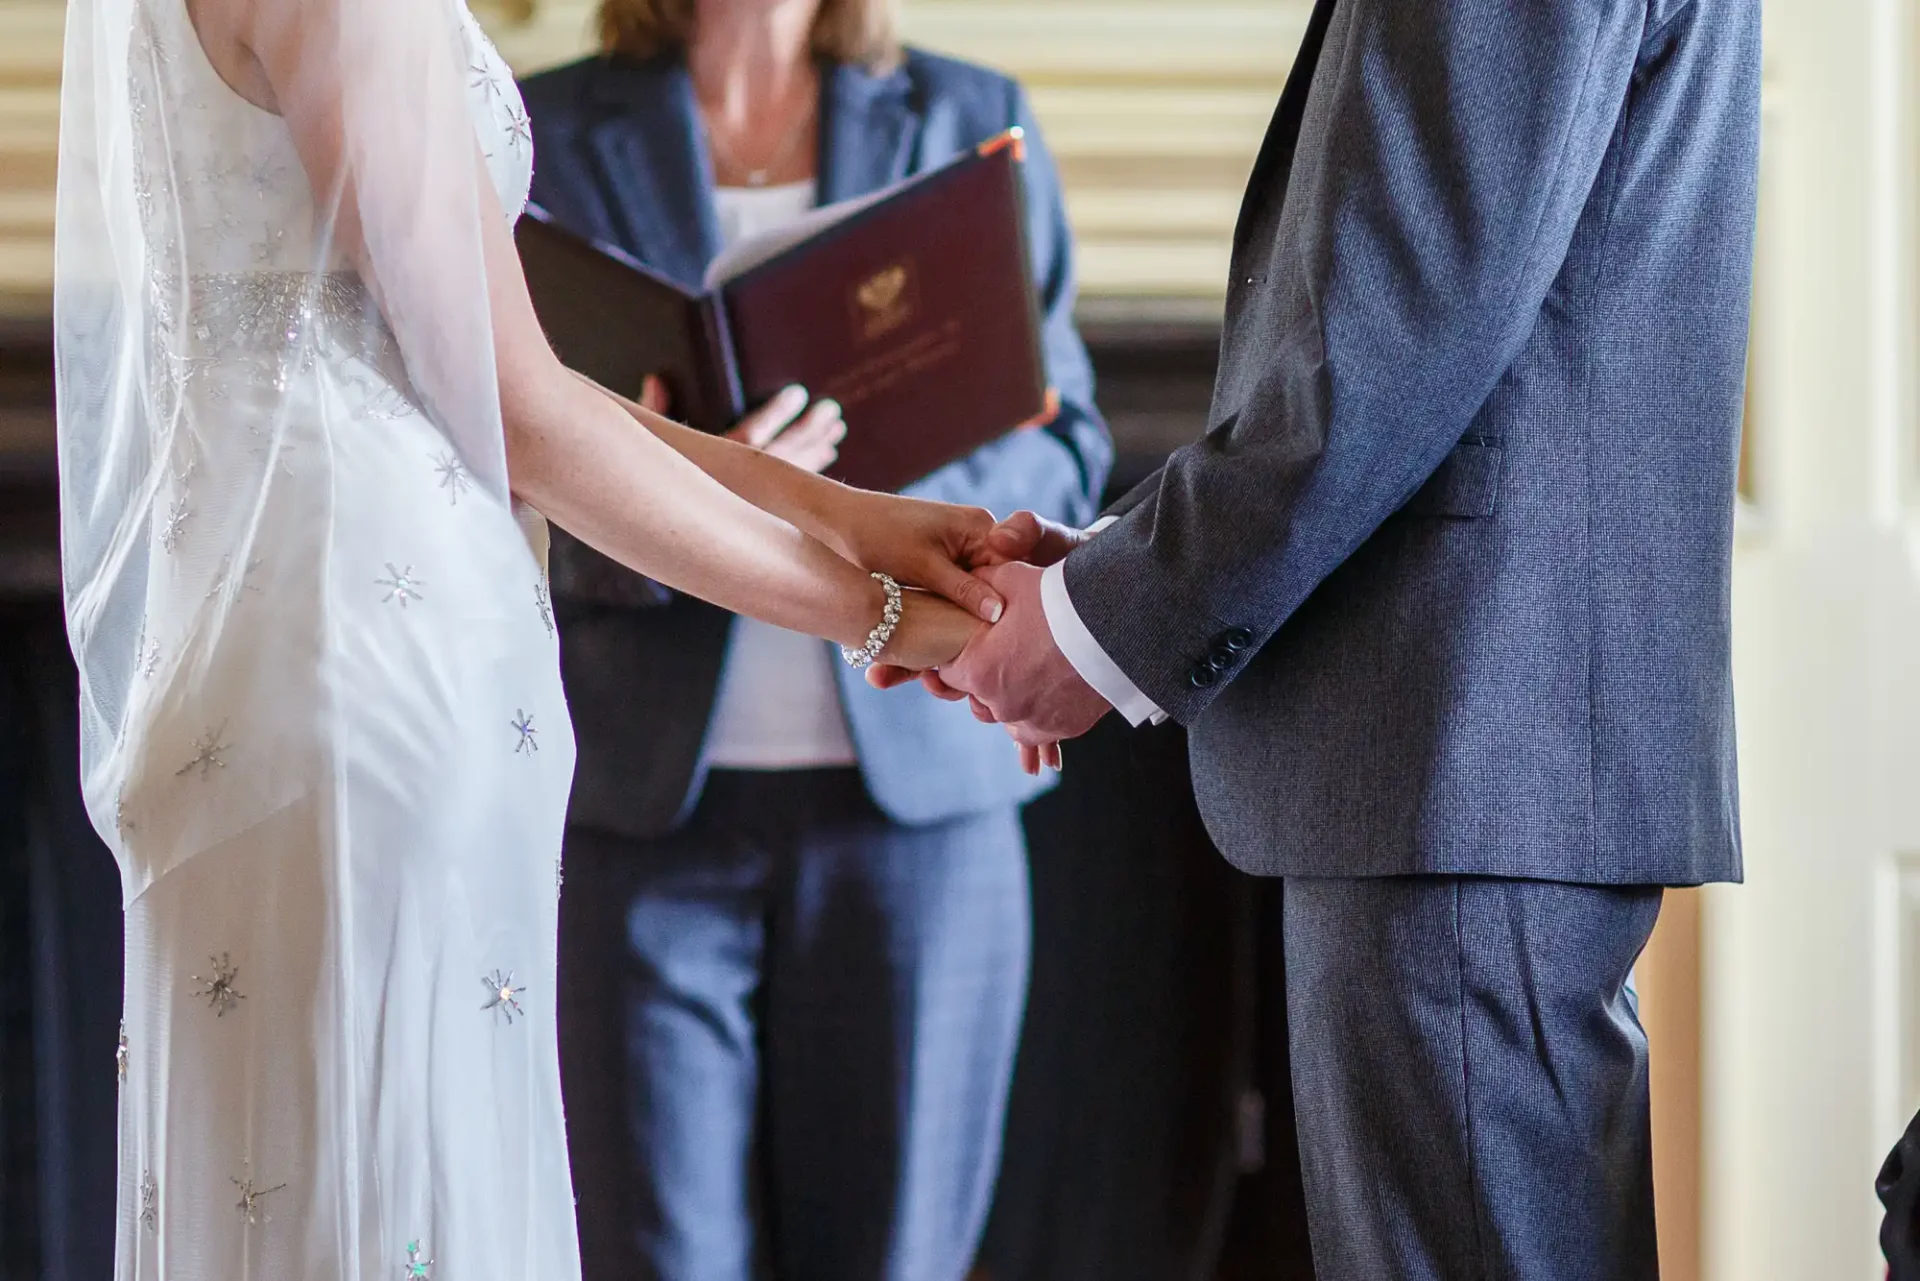 A bride in a white, embellished dress and a groom in a dark suit hold hands during a wedding ceremony officiated by a woman holding a book.